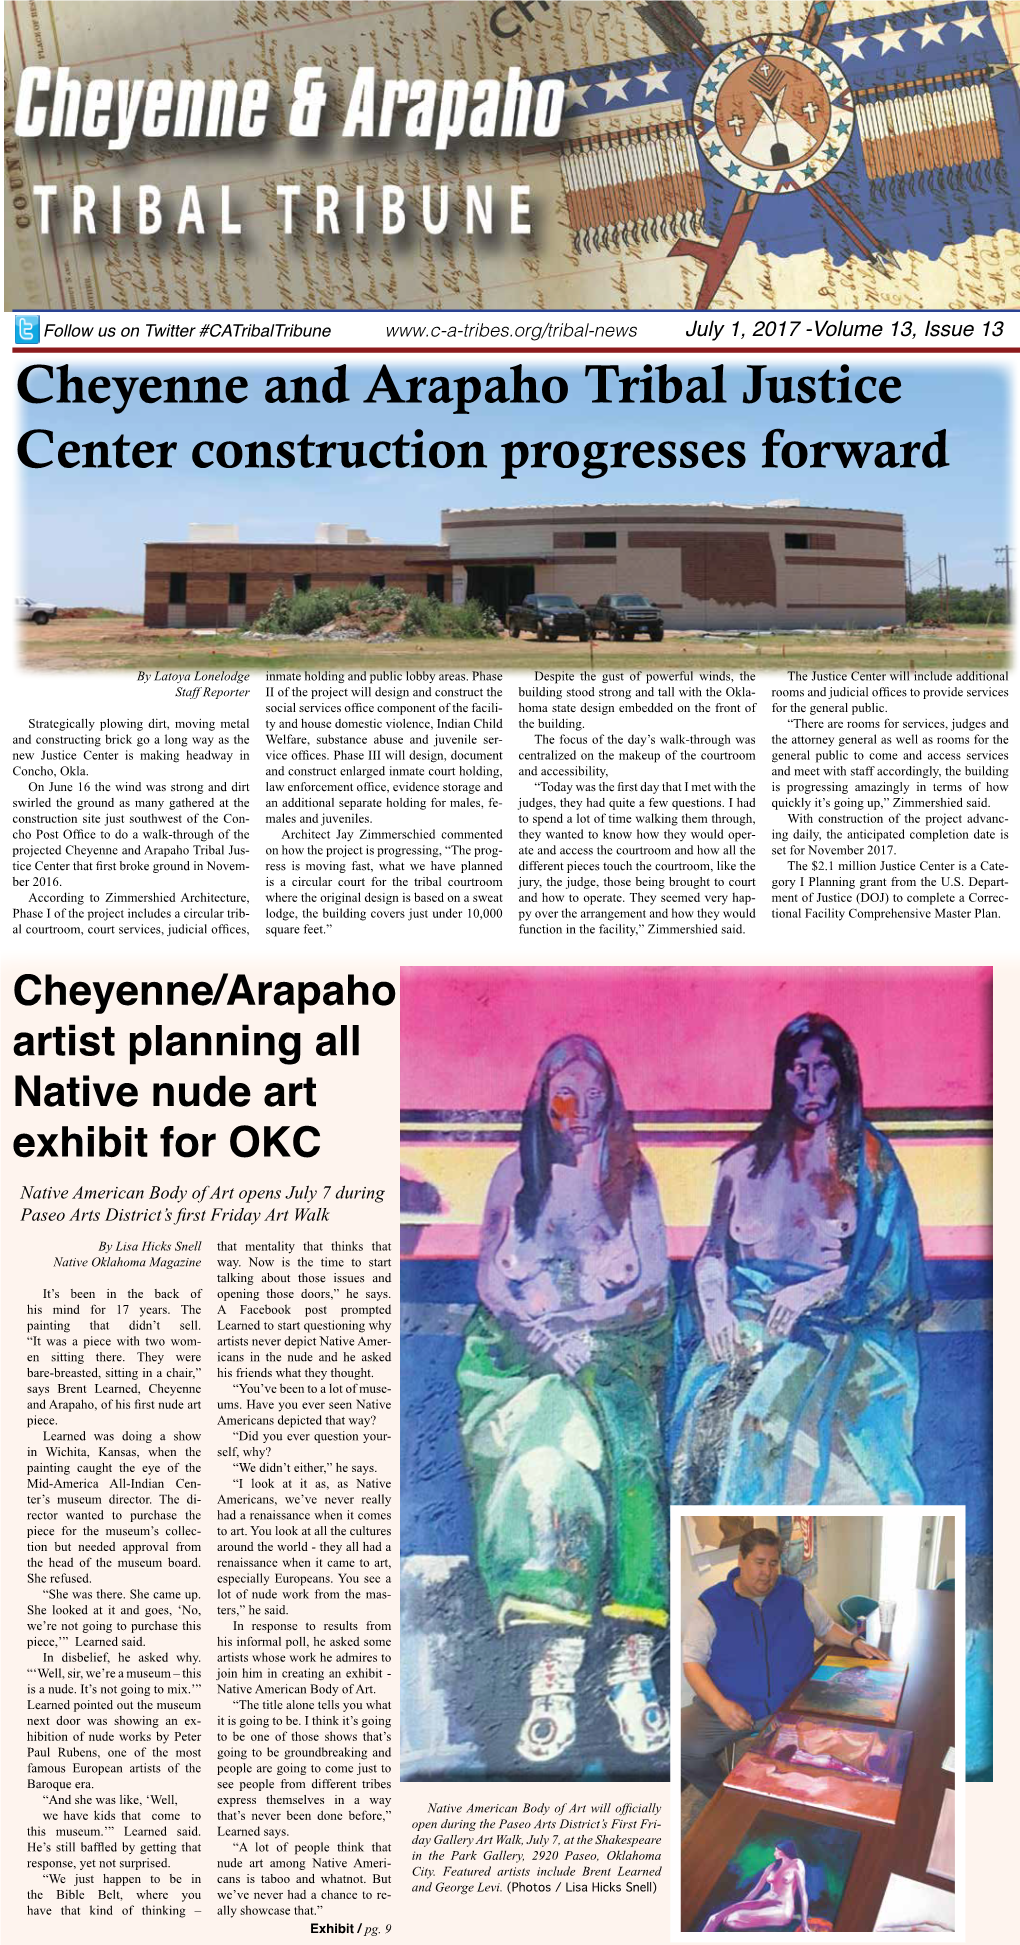 Cheyenne and Arapaho Tribal Justice Center Construction Progresses